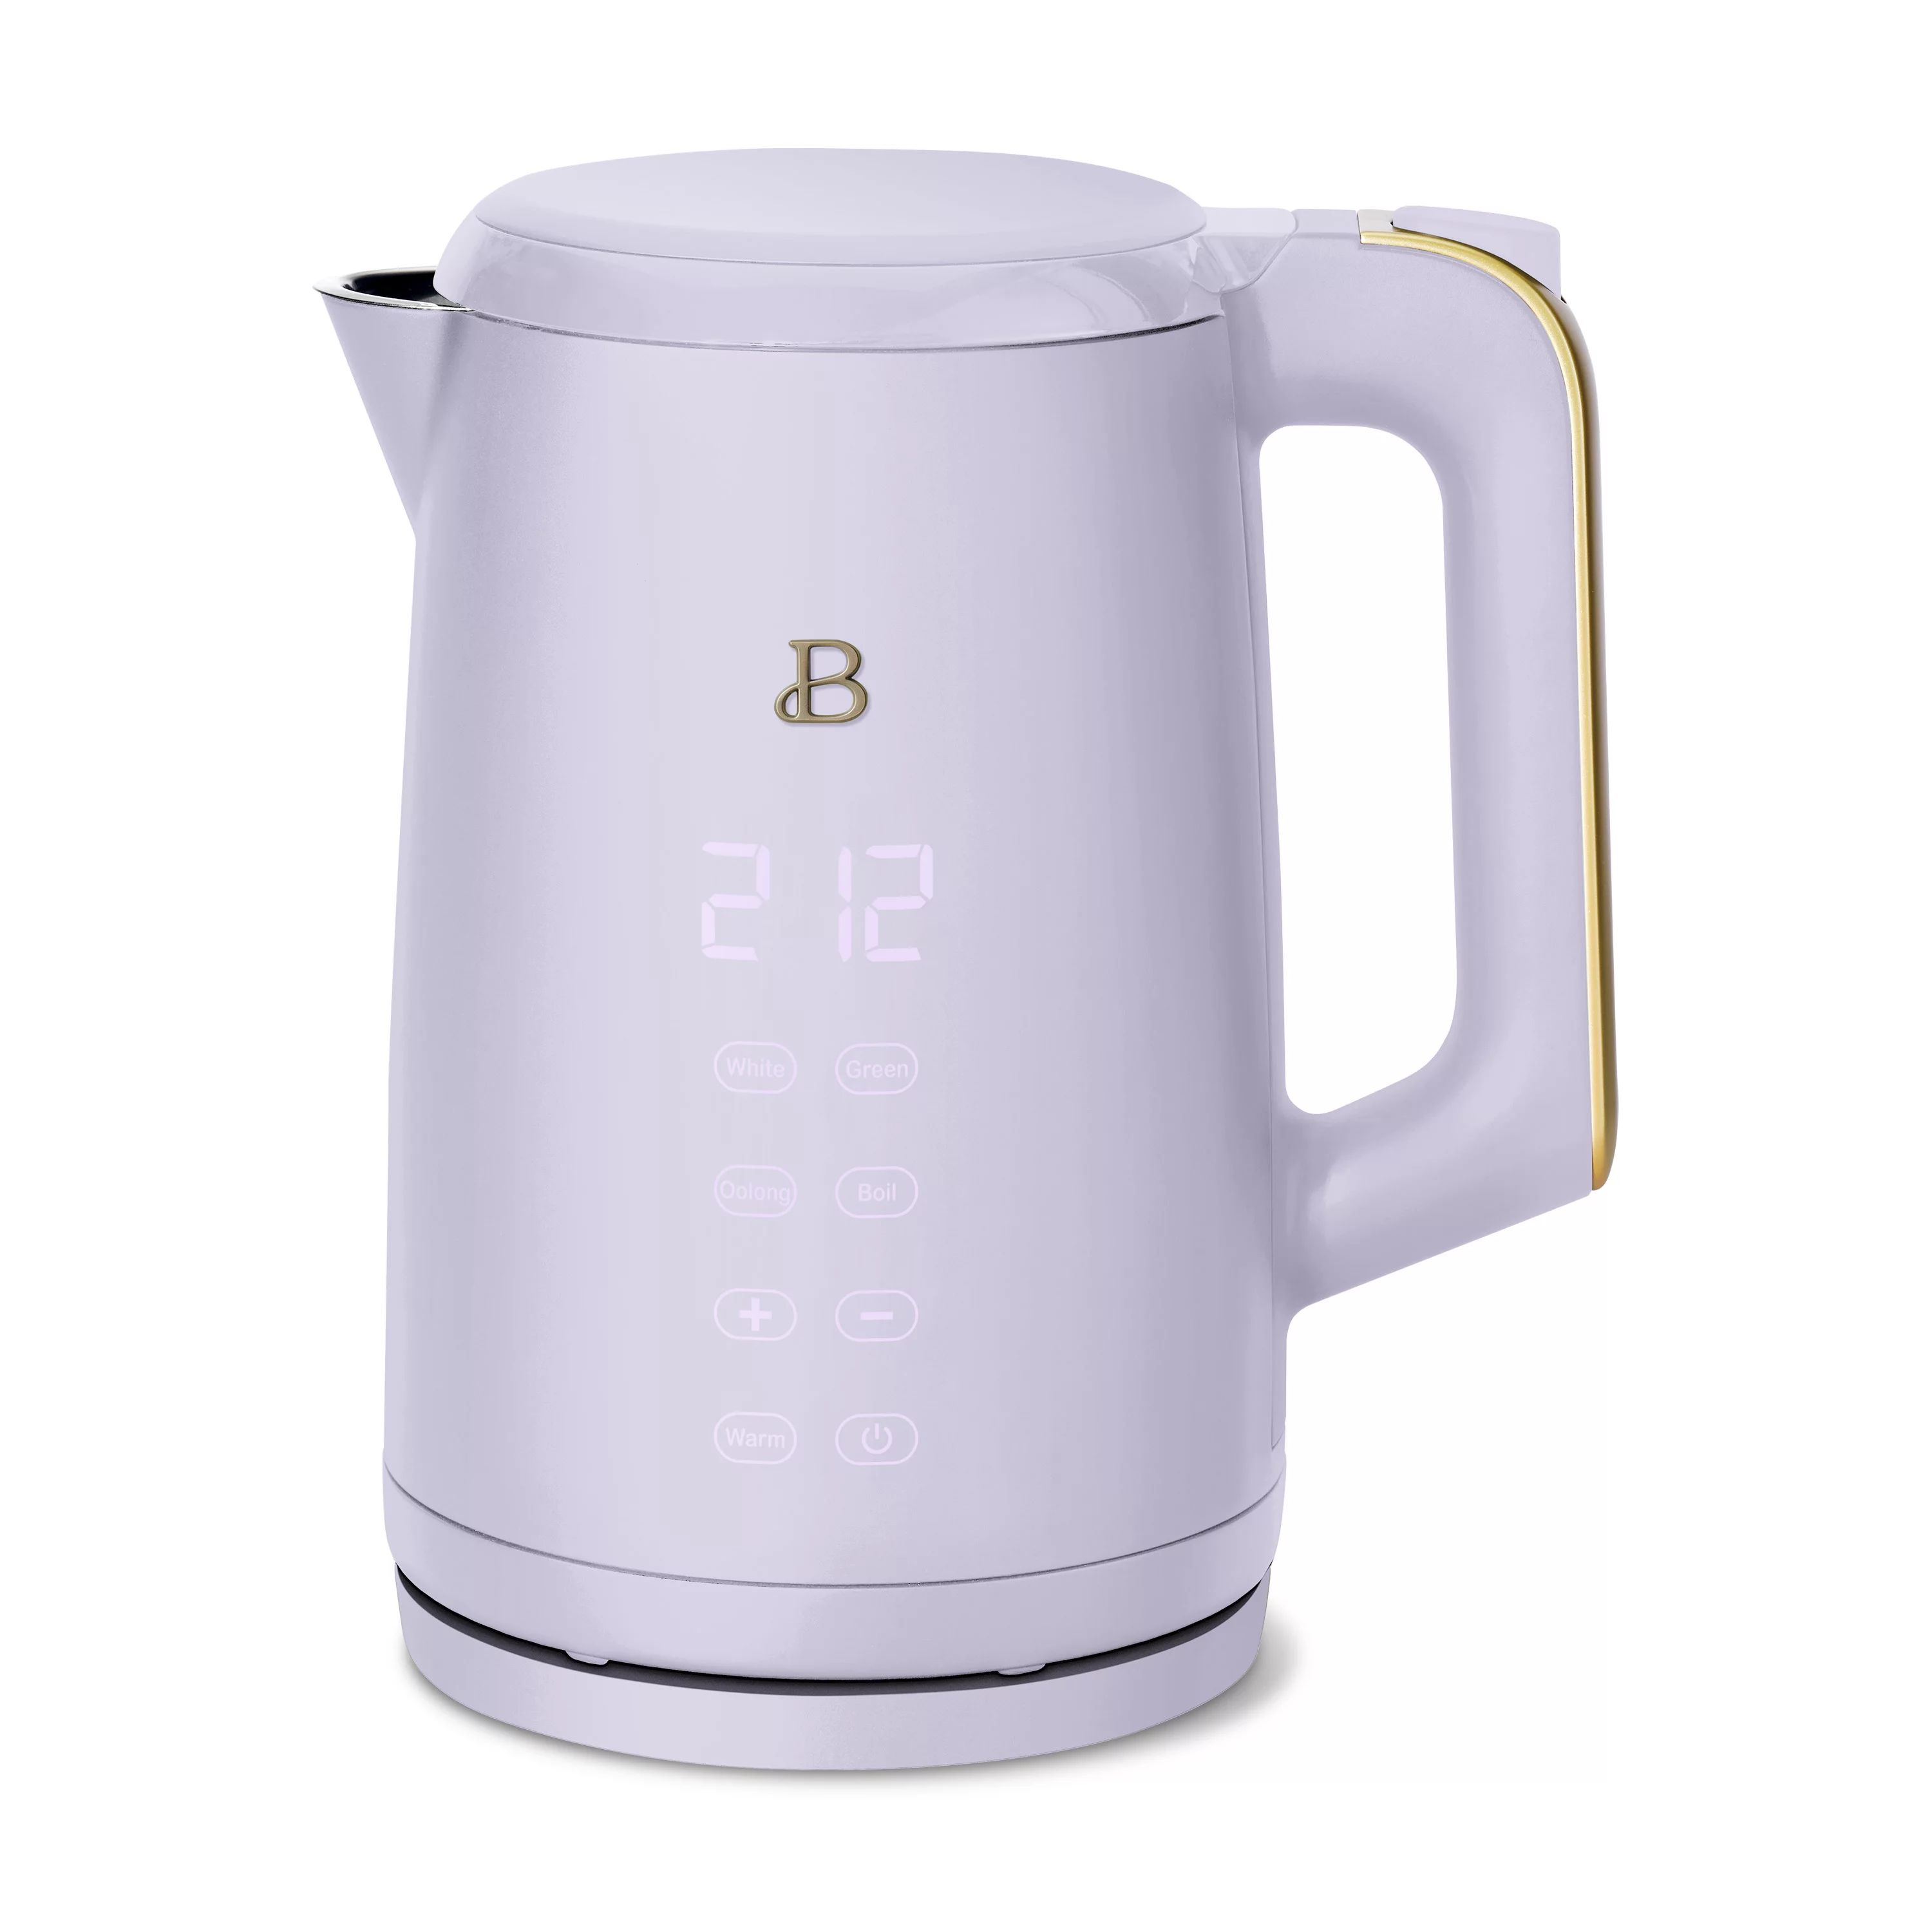 Beautiful 1.7L One-Touch Electric Kettle, Lavender by Drew Barrymore | Walmart (US)